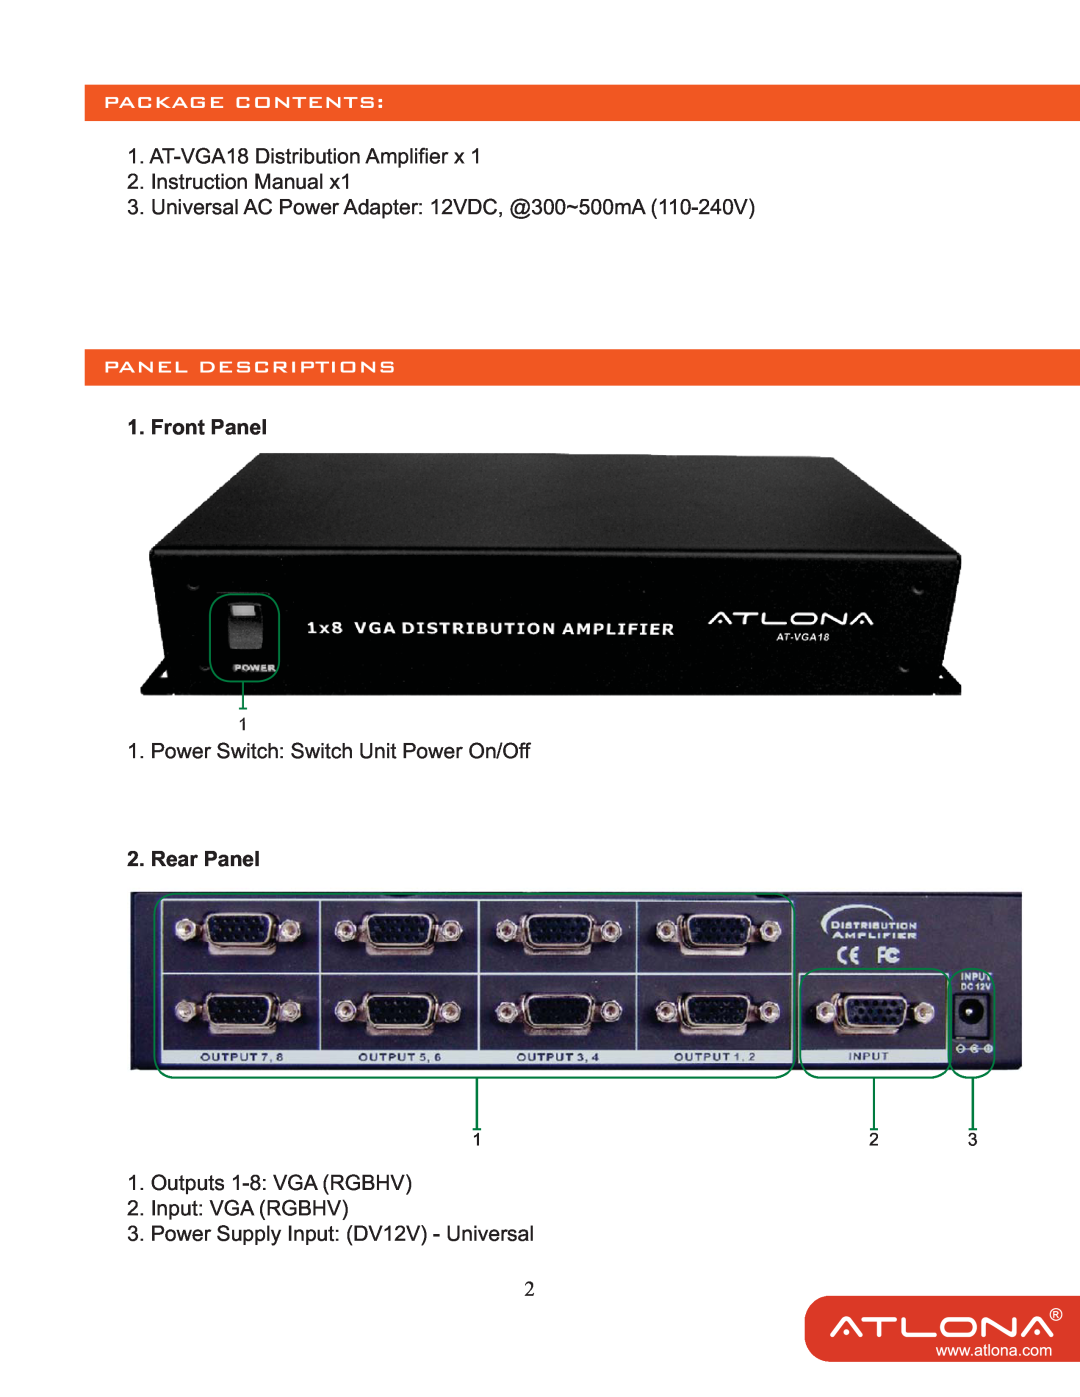 Atlona AT-VGA18 user manual Package Contents, Panel Descriptions, Front Panel, Rear Panel 